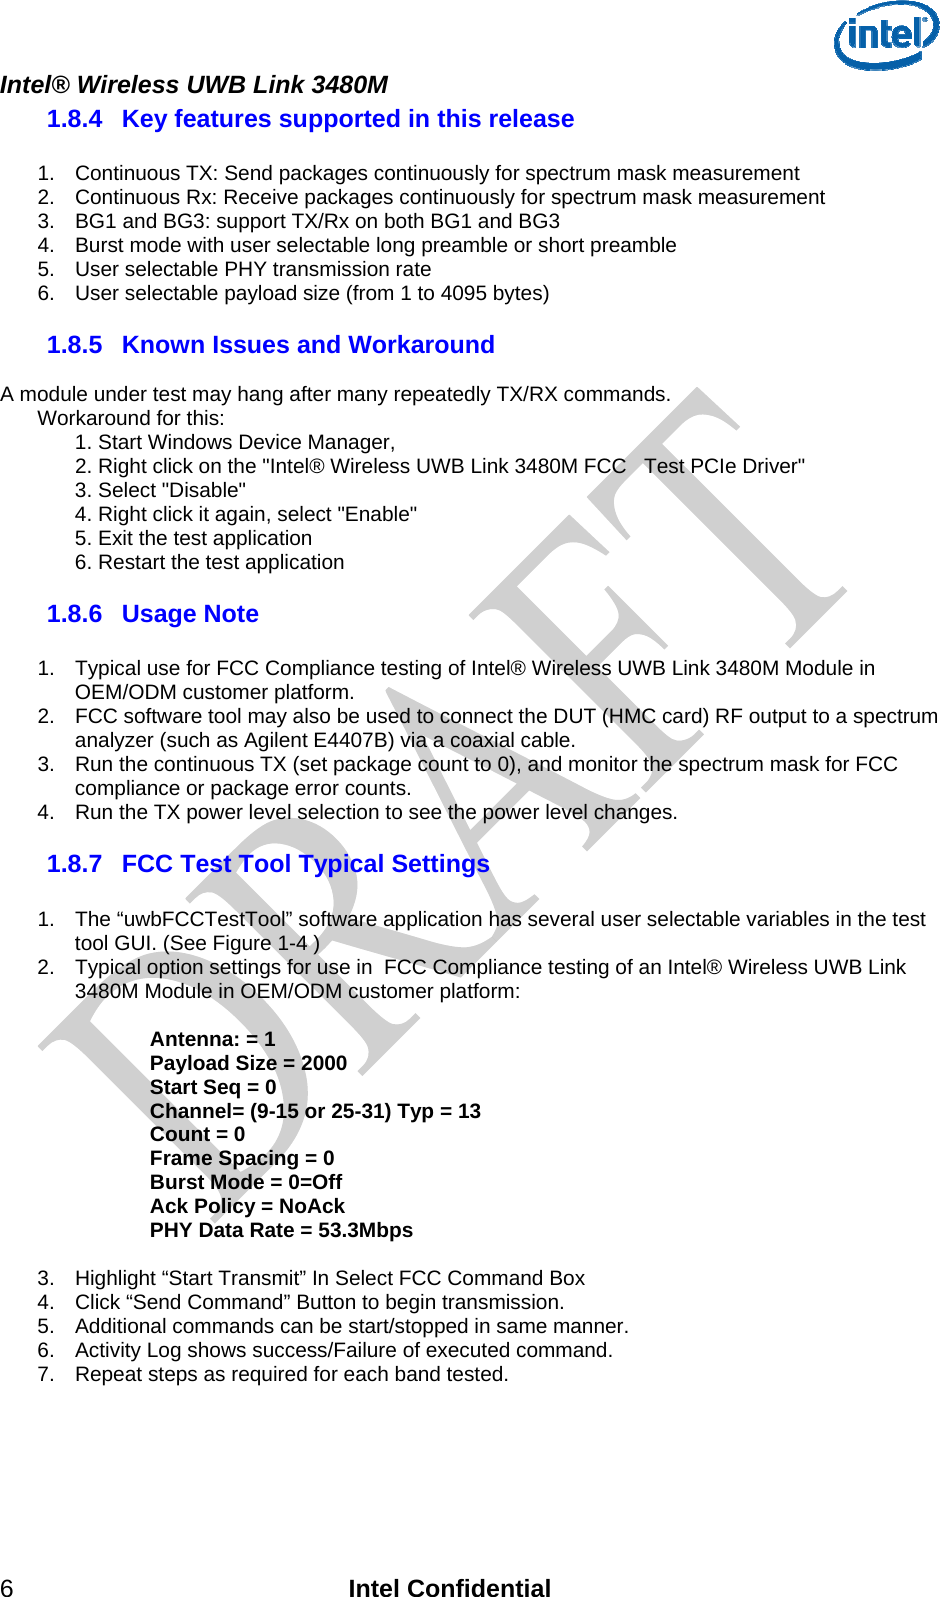  Intel® Wireless UWB Link 3480M 1.8.4  Key features supported in this release  1.  Continuous TX: Send packages continuously for spectrum mask measurement 2.  Continuous Rx: Receive packages continuously for spectrum mask measurement 3.  BG1 and BG3: support TX/Rx on both BG1 and BG3 4.  Burst mode with user selectable long preamble or short preamble 5.  User selectable PHY transmission rate 6.  User selectable payload size (from 1 to 4095 bytes)  1.8.5  Known Issues and Workaround  A module under test may hang after many repeatedly TX/RX commands.   Workaround for this:     1. Start Windows Device Manager,  2. Right click on the &quot;Intel® Wireless UWB Link 3480M FCC   Test PCIe Driver&quot;   3. Select &quot;Disable&quot;   4. Right click it again, select &quot;Enable&quot;   5. Exit the test application   6. Restart the test application 1.8.6  Usage Note  1.  Typical use for FCC Compliance testing of Intel® Wireless UWB Link 3480M Module in OEM/ODM customer platform.  2.  FCC software tool may also be used to connect the DUT (HMC card) RF output to a spectrum analyzer (such as Agilent E4407B) via a coaxial cable.   3.  Run the continuous TX (set package count to 0), and monitor the spectrum mask for FCC compliance or package error counts. 4.  Run the TX power level selection to see the power level changes. 1.8.7  FCC Test Tool Typical Settings   1.  The “uwbFCCTestTool” software application has several user selectable variables in the test tool GUI. (See Figure 1-4 )  2.  Typical option settings for use in  FCC Compliance testing of an Intel® Wireless UWB Link 3480M Module in OEM/ODM customer platform:  Antenna: = 1 Payload Size = 2000 Start Seq = 0 Channel= (9-15 or 25-31) Typ = 13 Count = 0 Frame Spacing = 0 Burst Mode = 0=Off Ack Policy = NoAck PHY Data Rate = 53.3Mbps   3.  Highlight “Start Transmit” In Select FCC Command Box 4.  Click “Send Command” Button to begin transmission. 5.  Additional commands can be start/stopped in same manner. 6.  Activity Log shows success/Failure of executed command. 7.  Repeat steps as required for each band tested.     6 Intel Confidential 